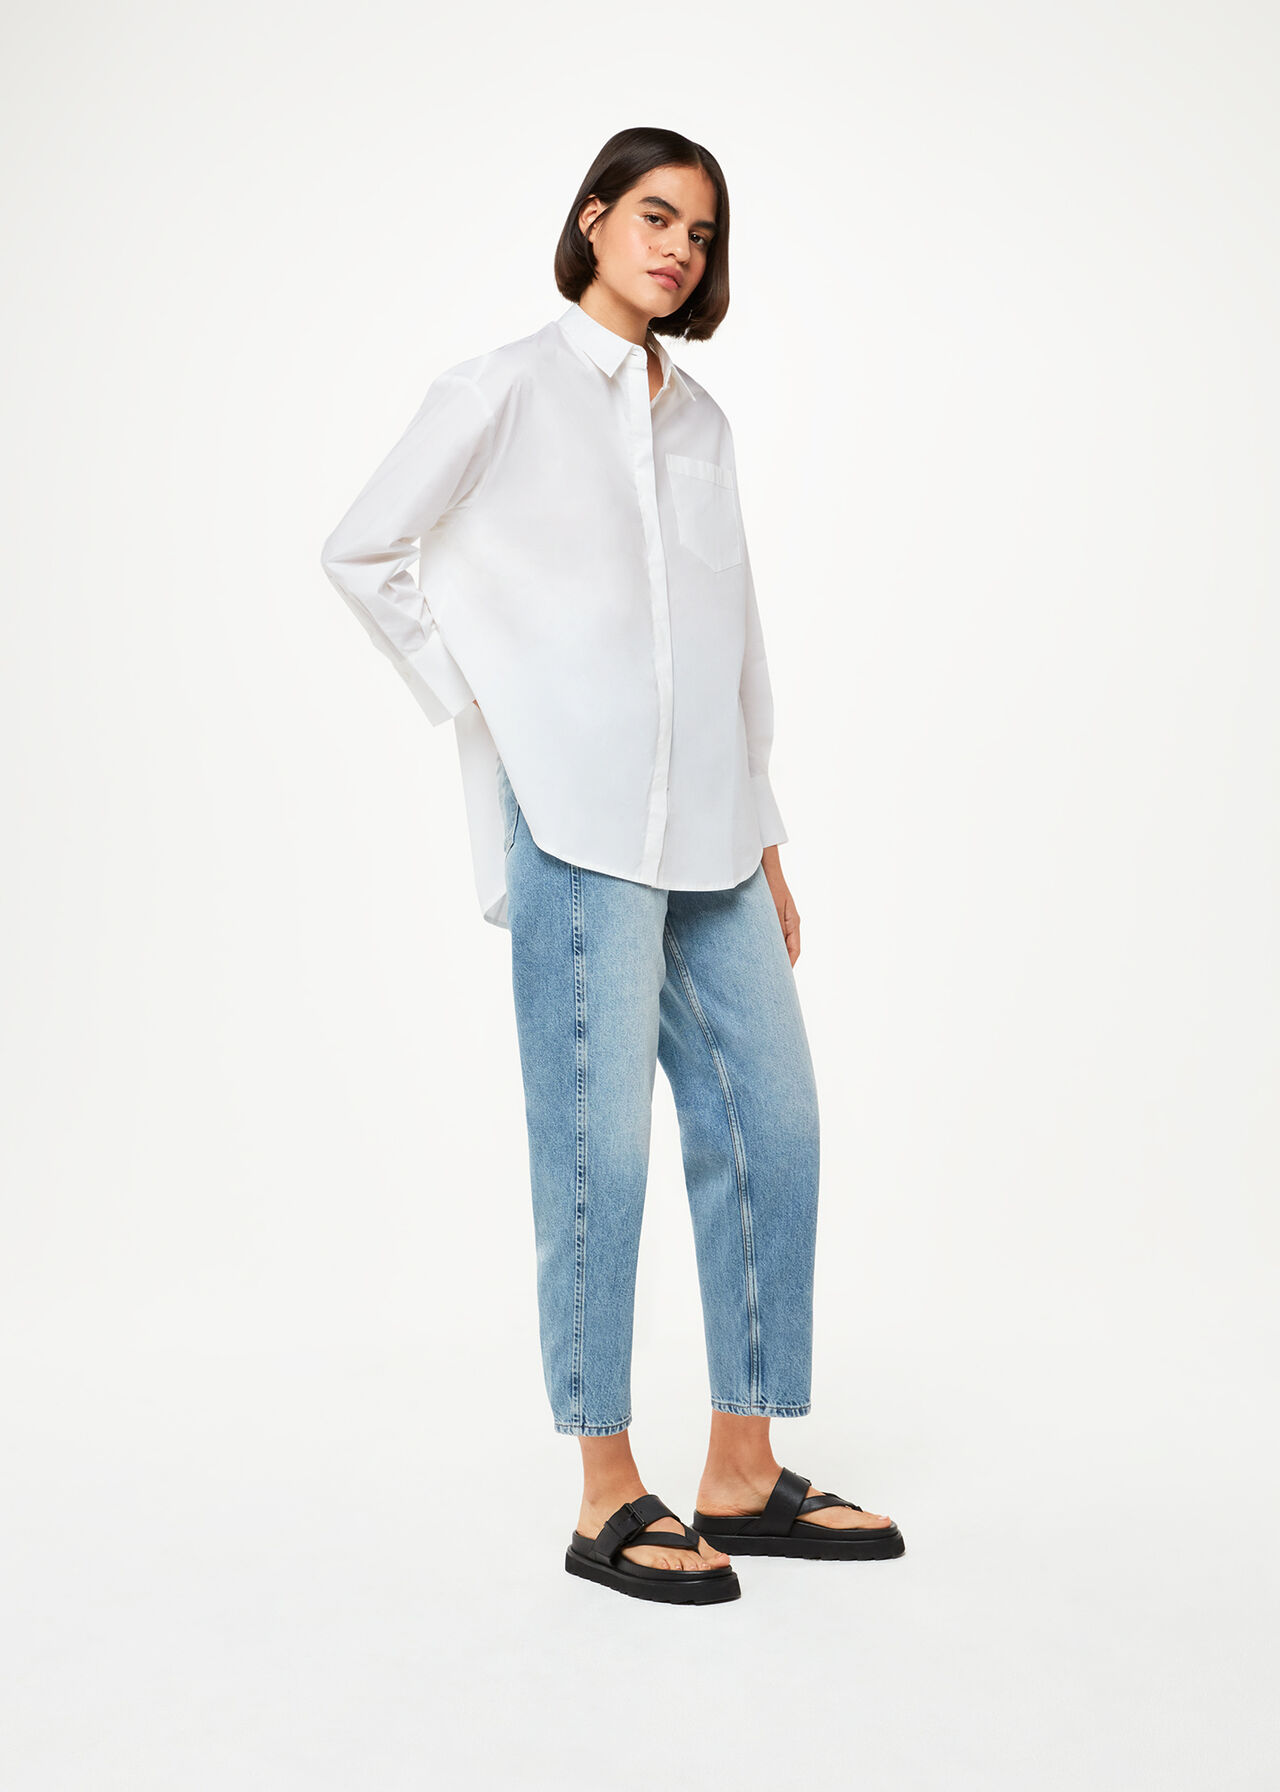 Classic White Shirt | Oversized Fit | Order Now at Whistles